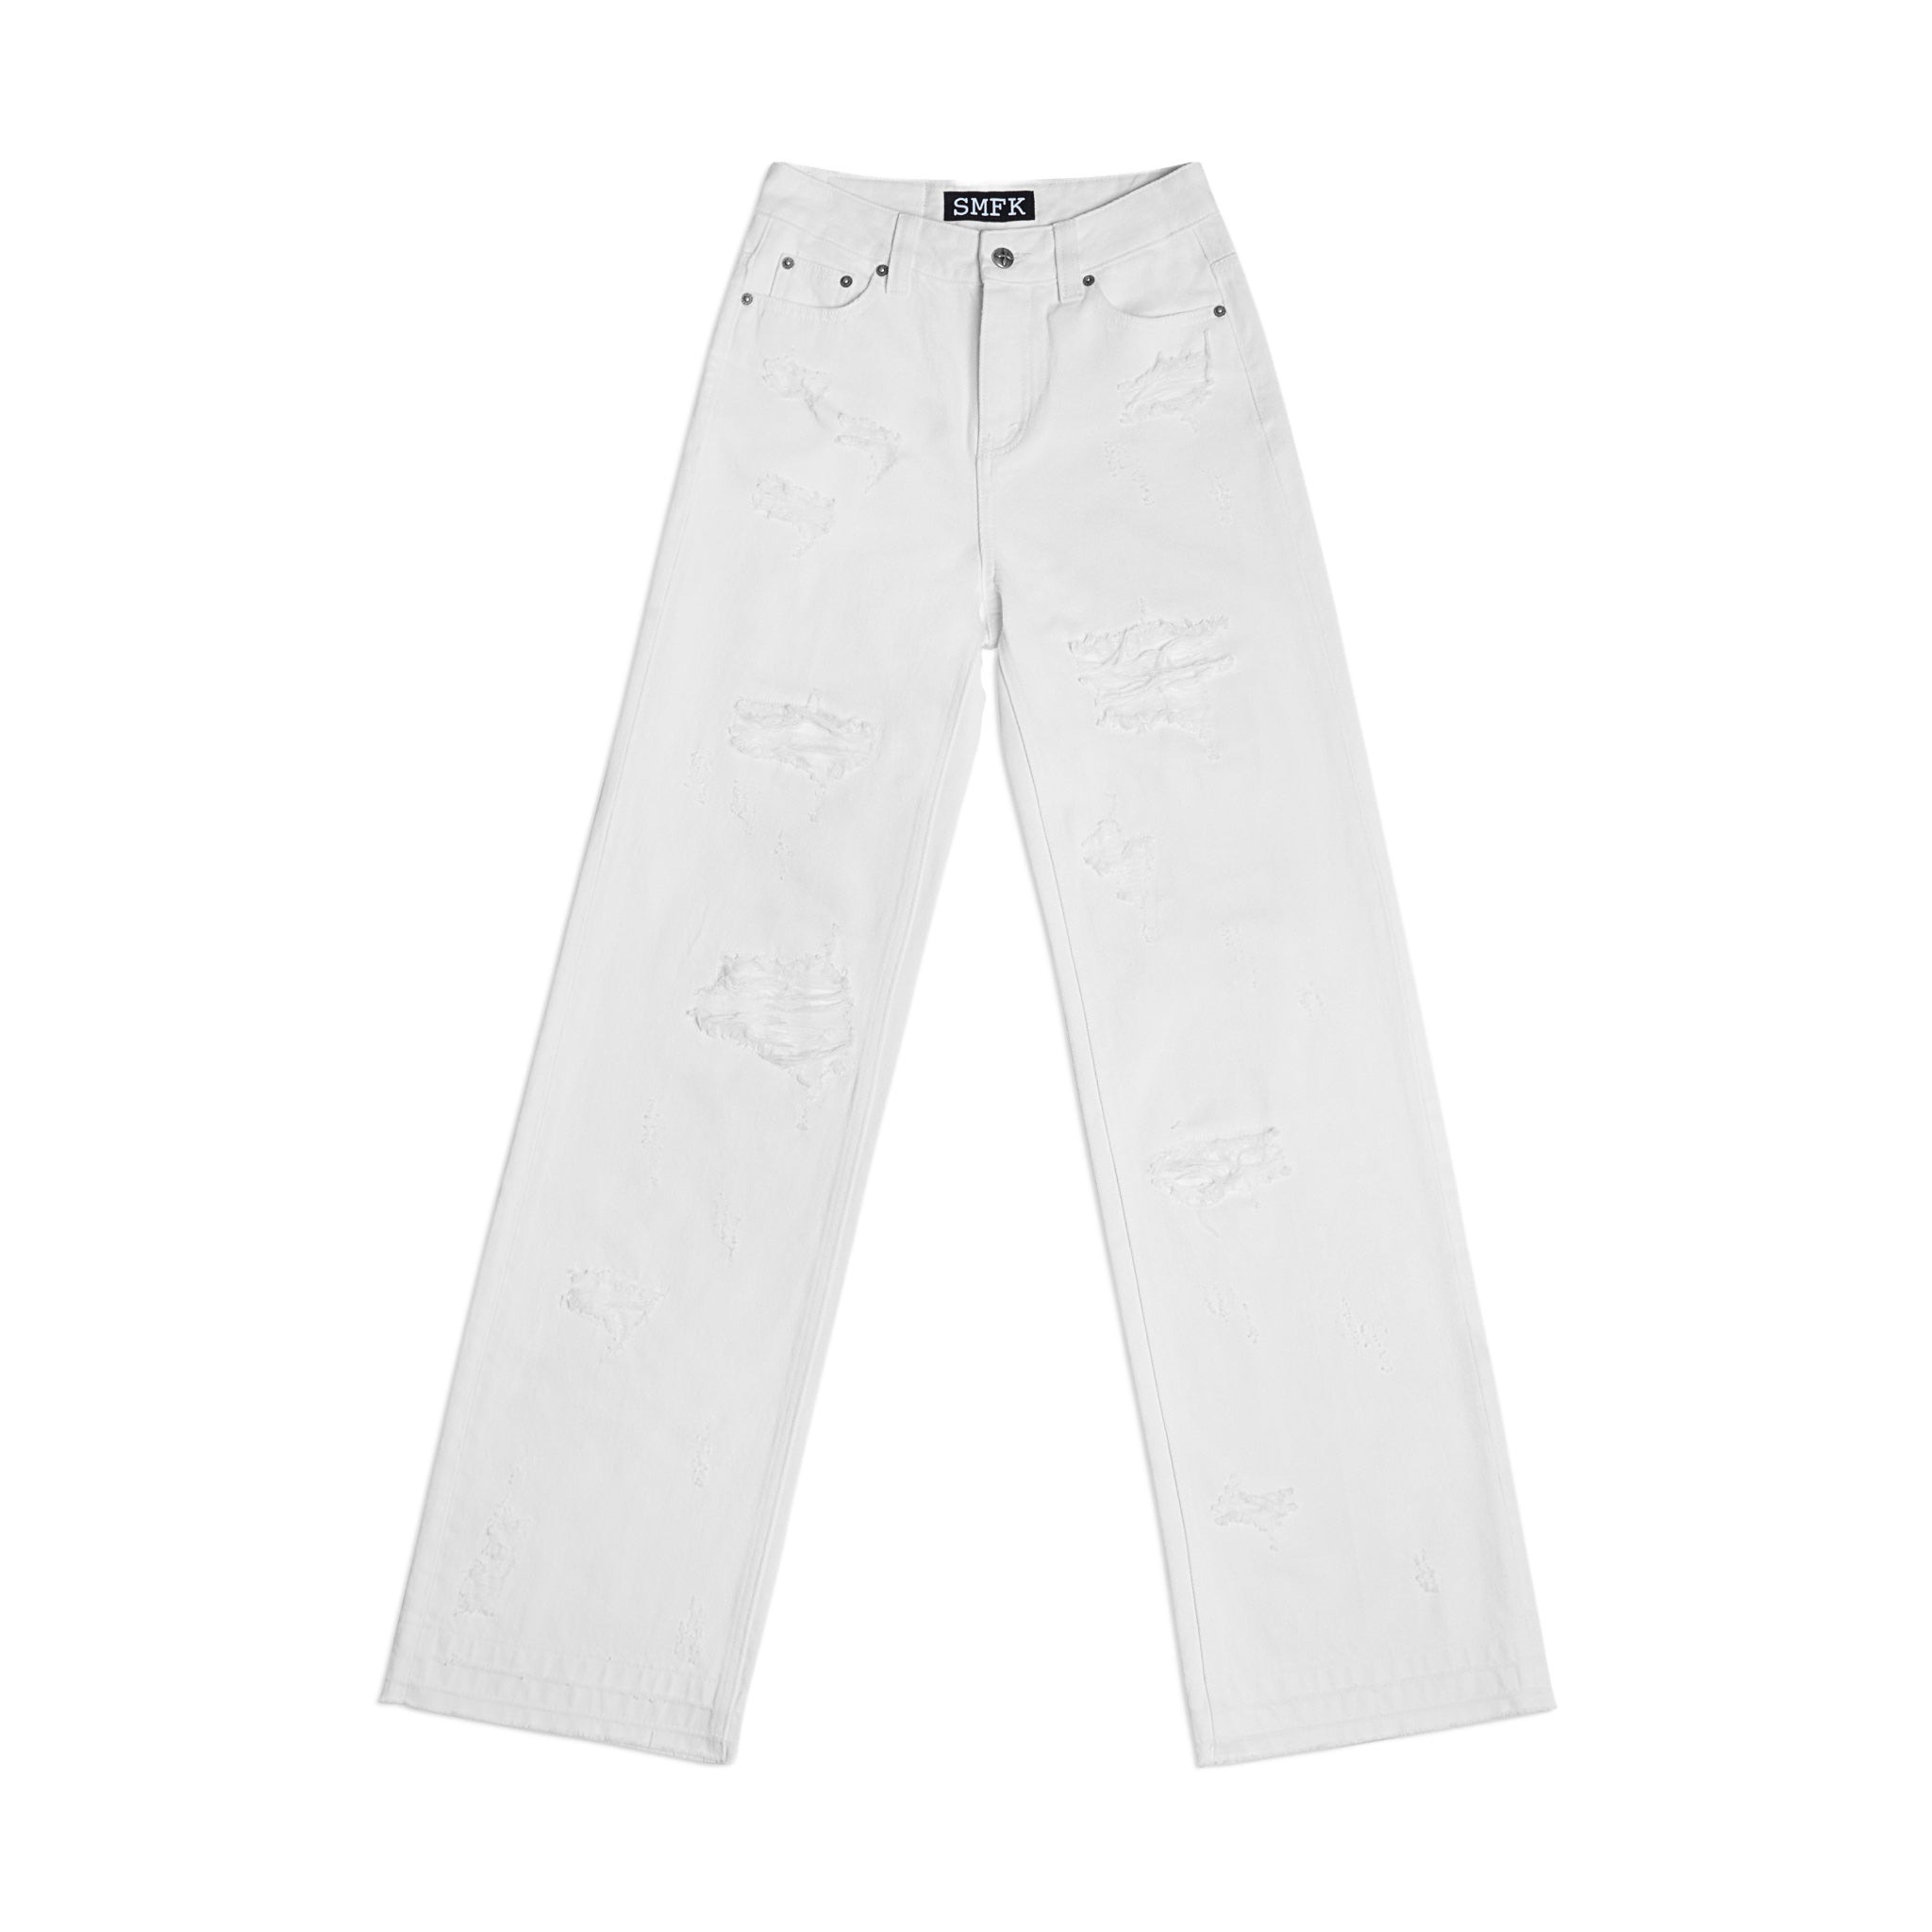 SMFK Dancer Group Wandering Wide Leg White Jeans | MADA IN CHINA